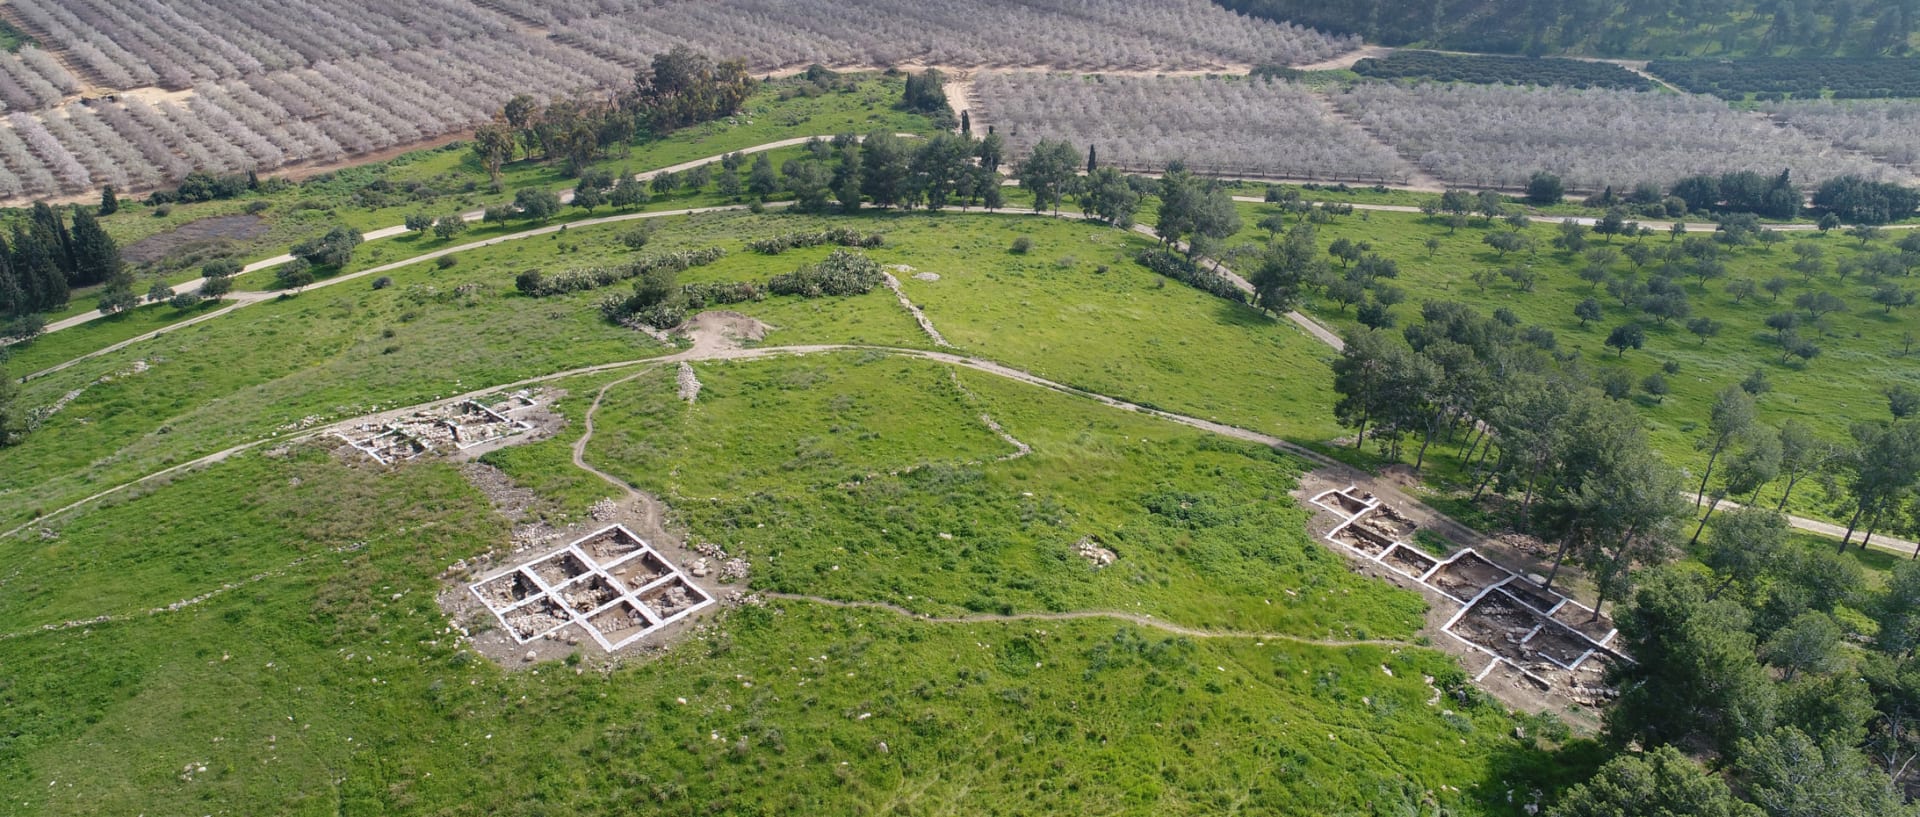 Lost biblical city of Ziklag discovered by archaeologists - Strange Sounds